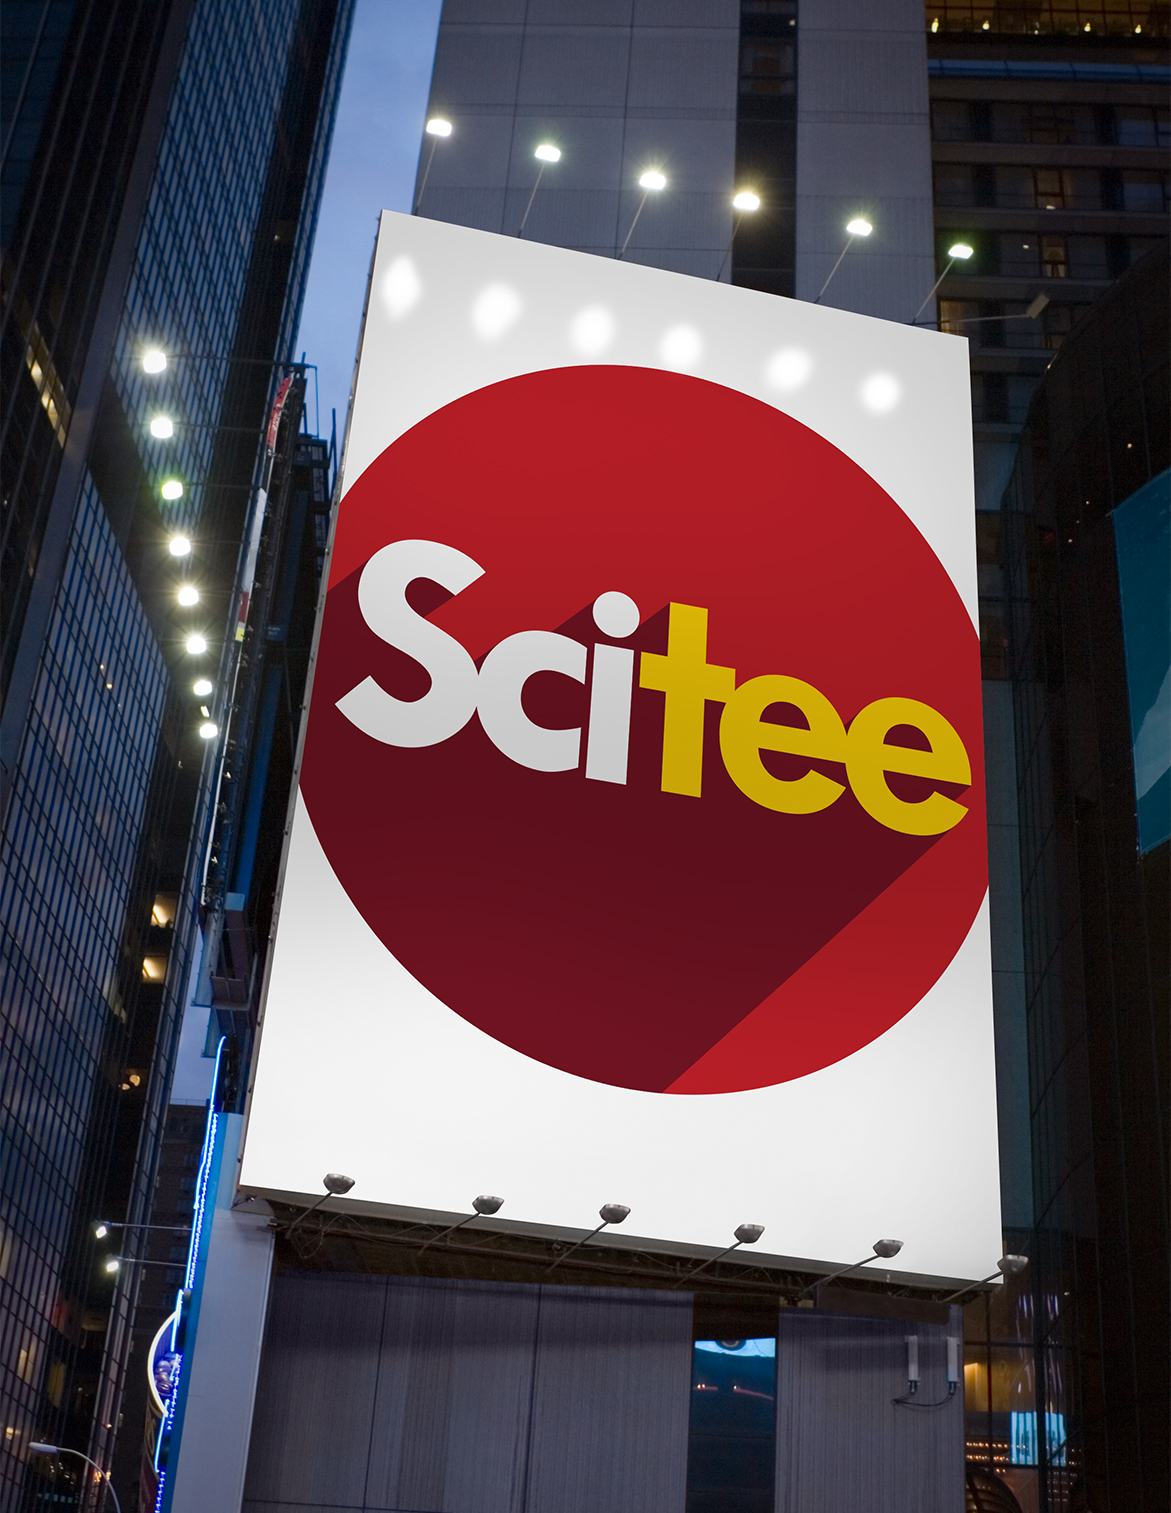 SciTee Logo on Sign